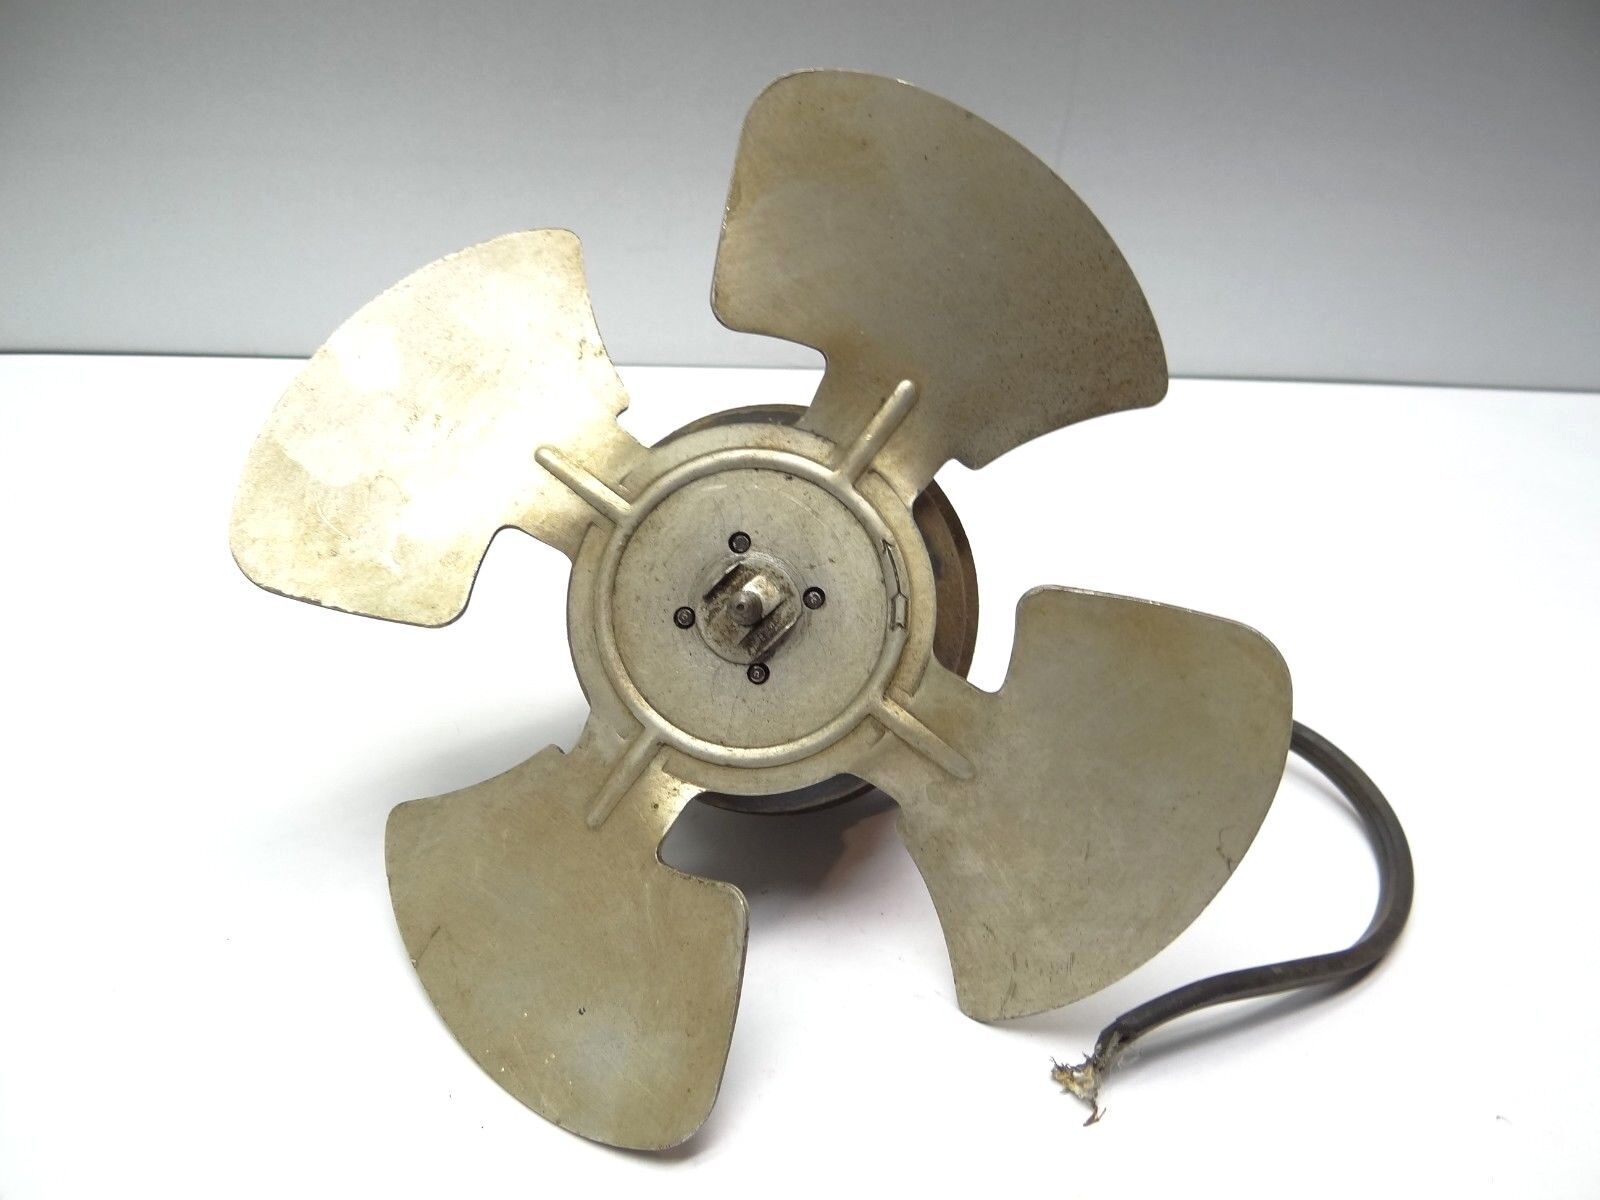 Vintage General Electric 115v 60 Cycle High-Impedance Protection Fan Motor Part